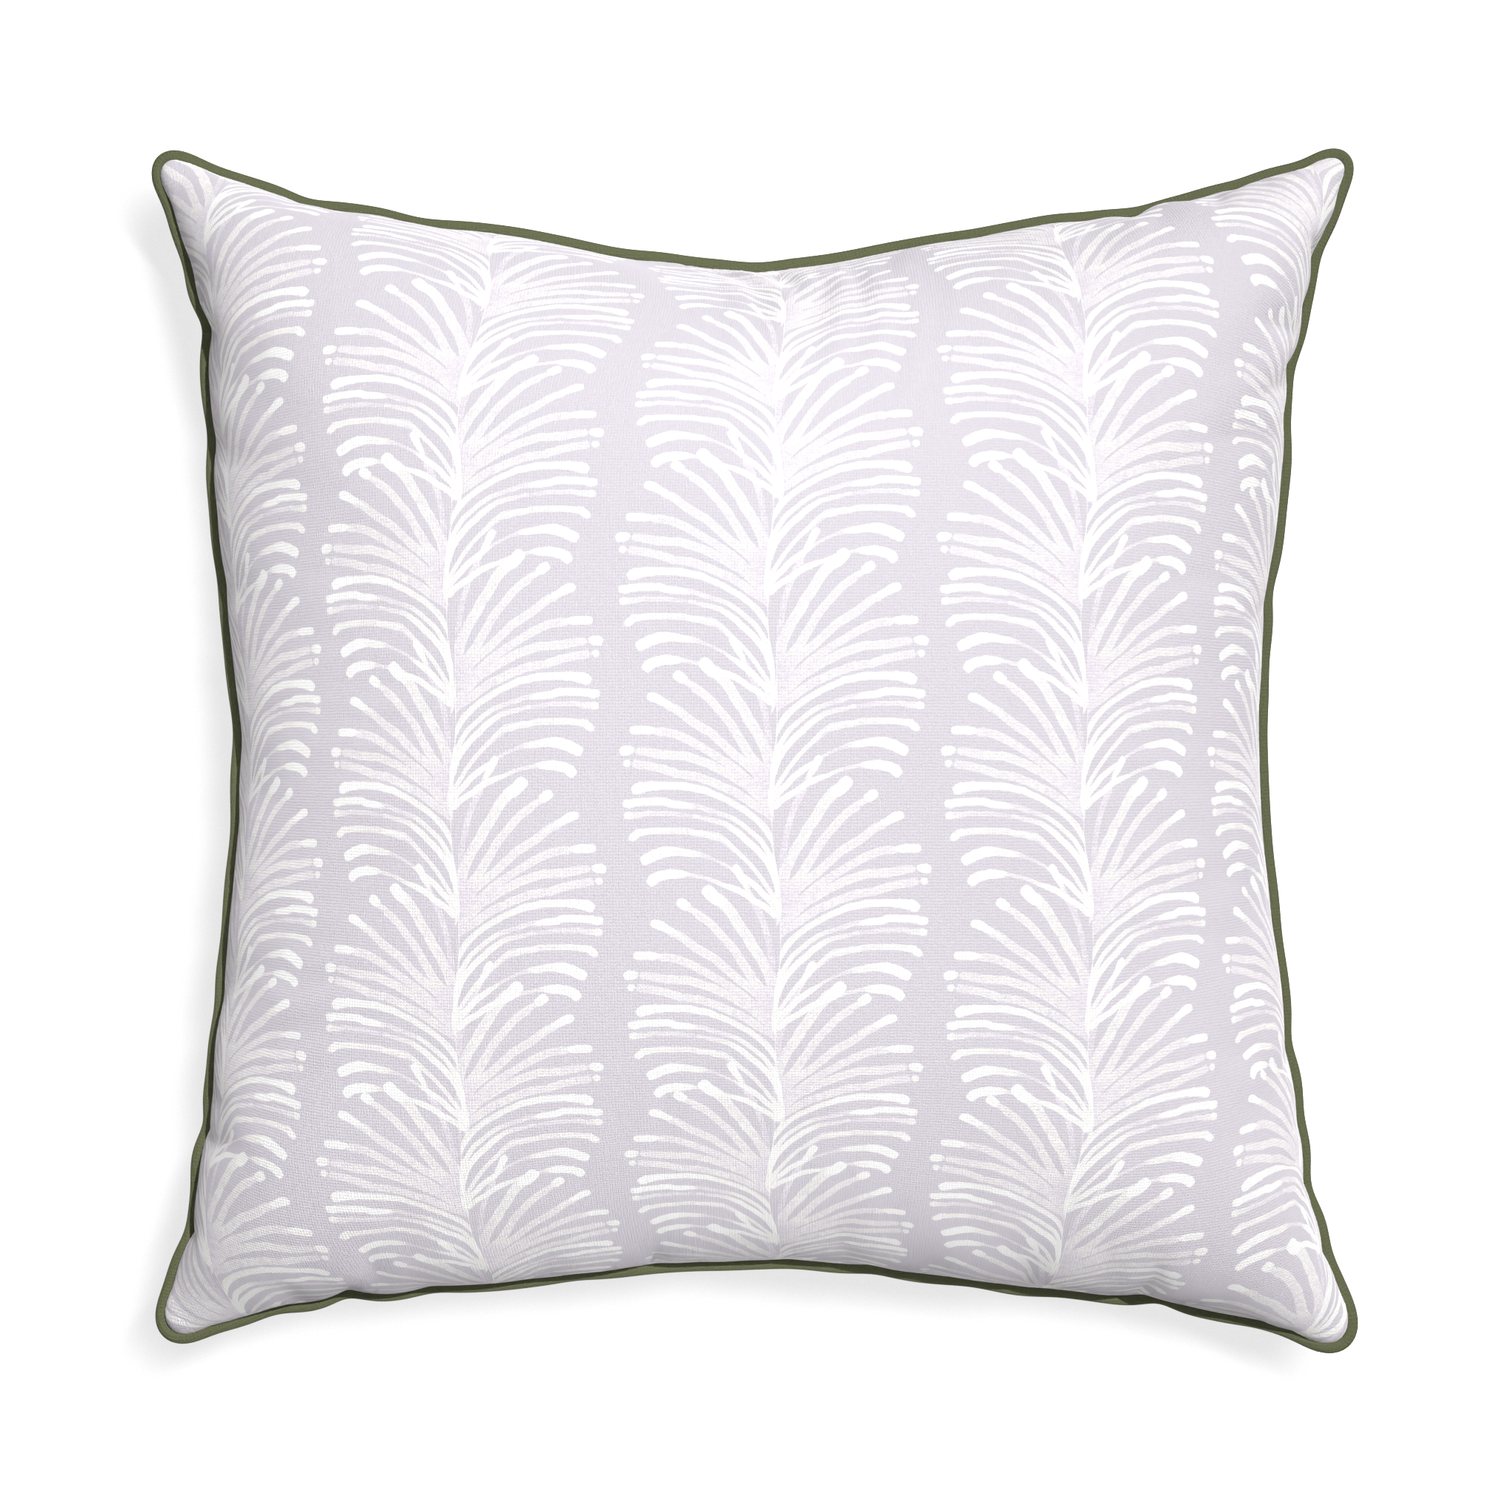 Euro-sham emma lavender custom pillow with f piping on white background